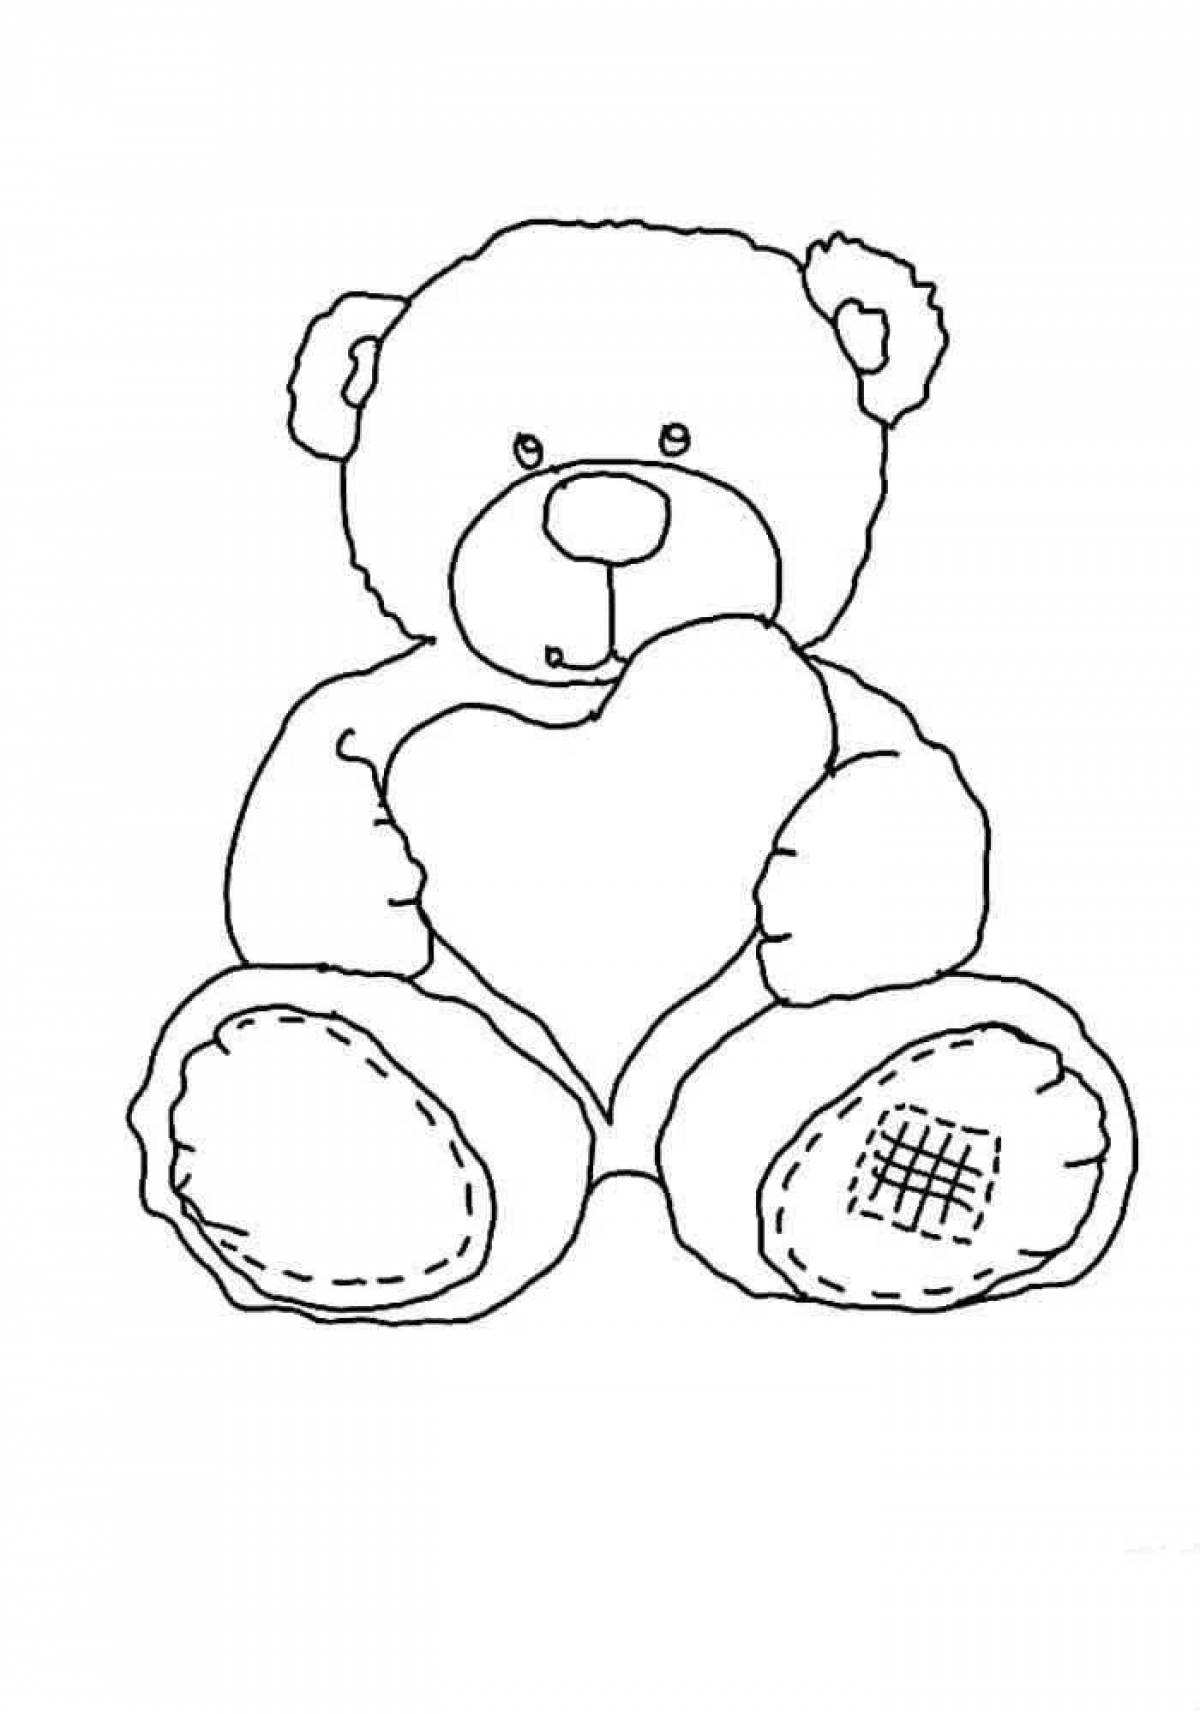 Cute and friendly bear coloring book